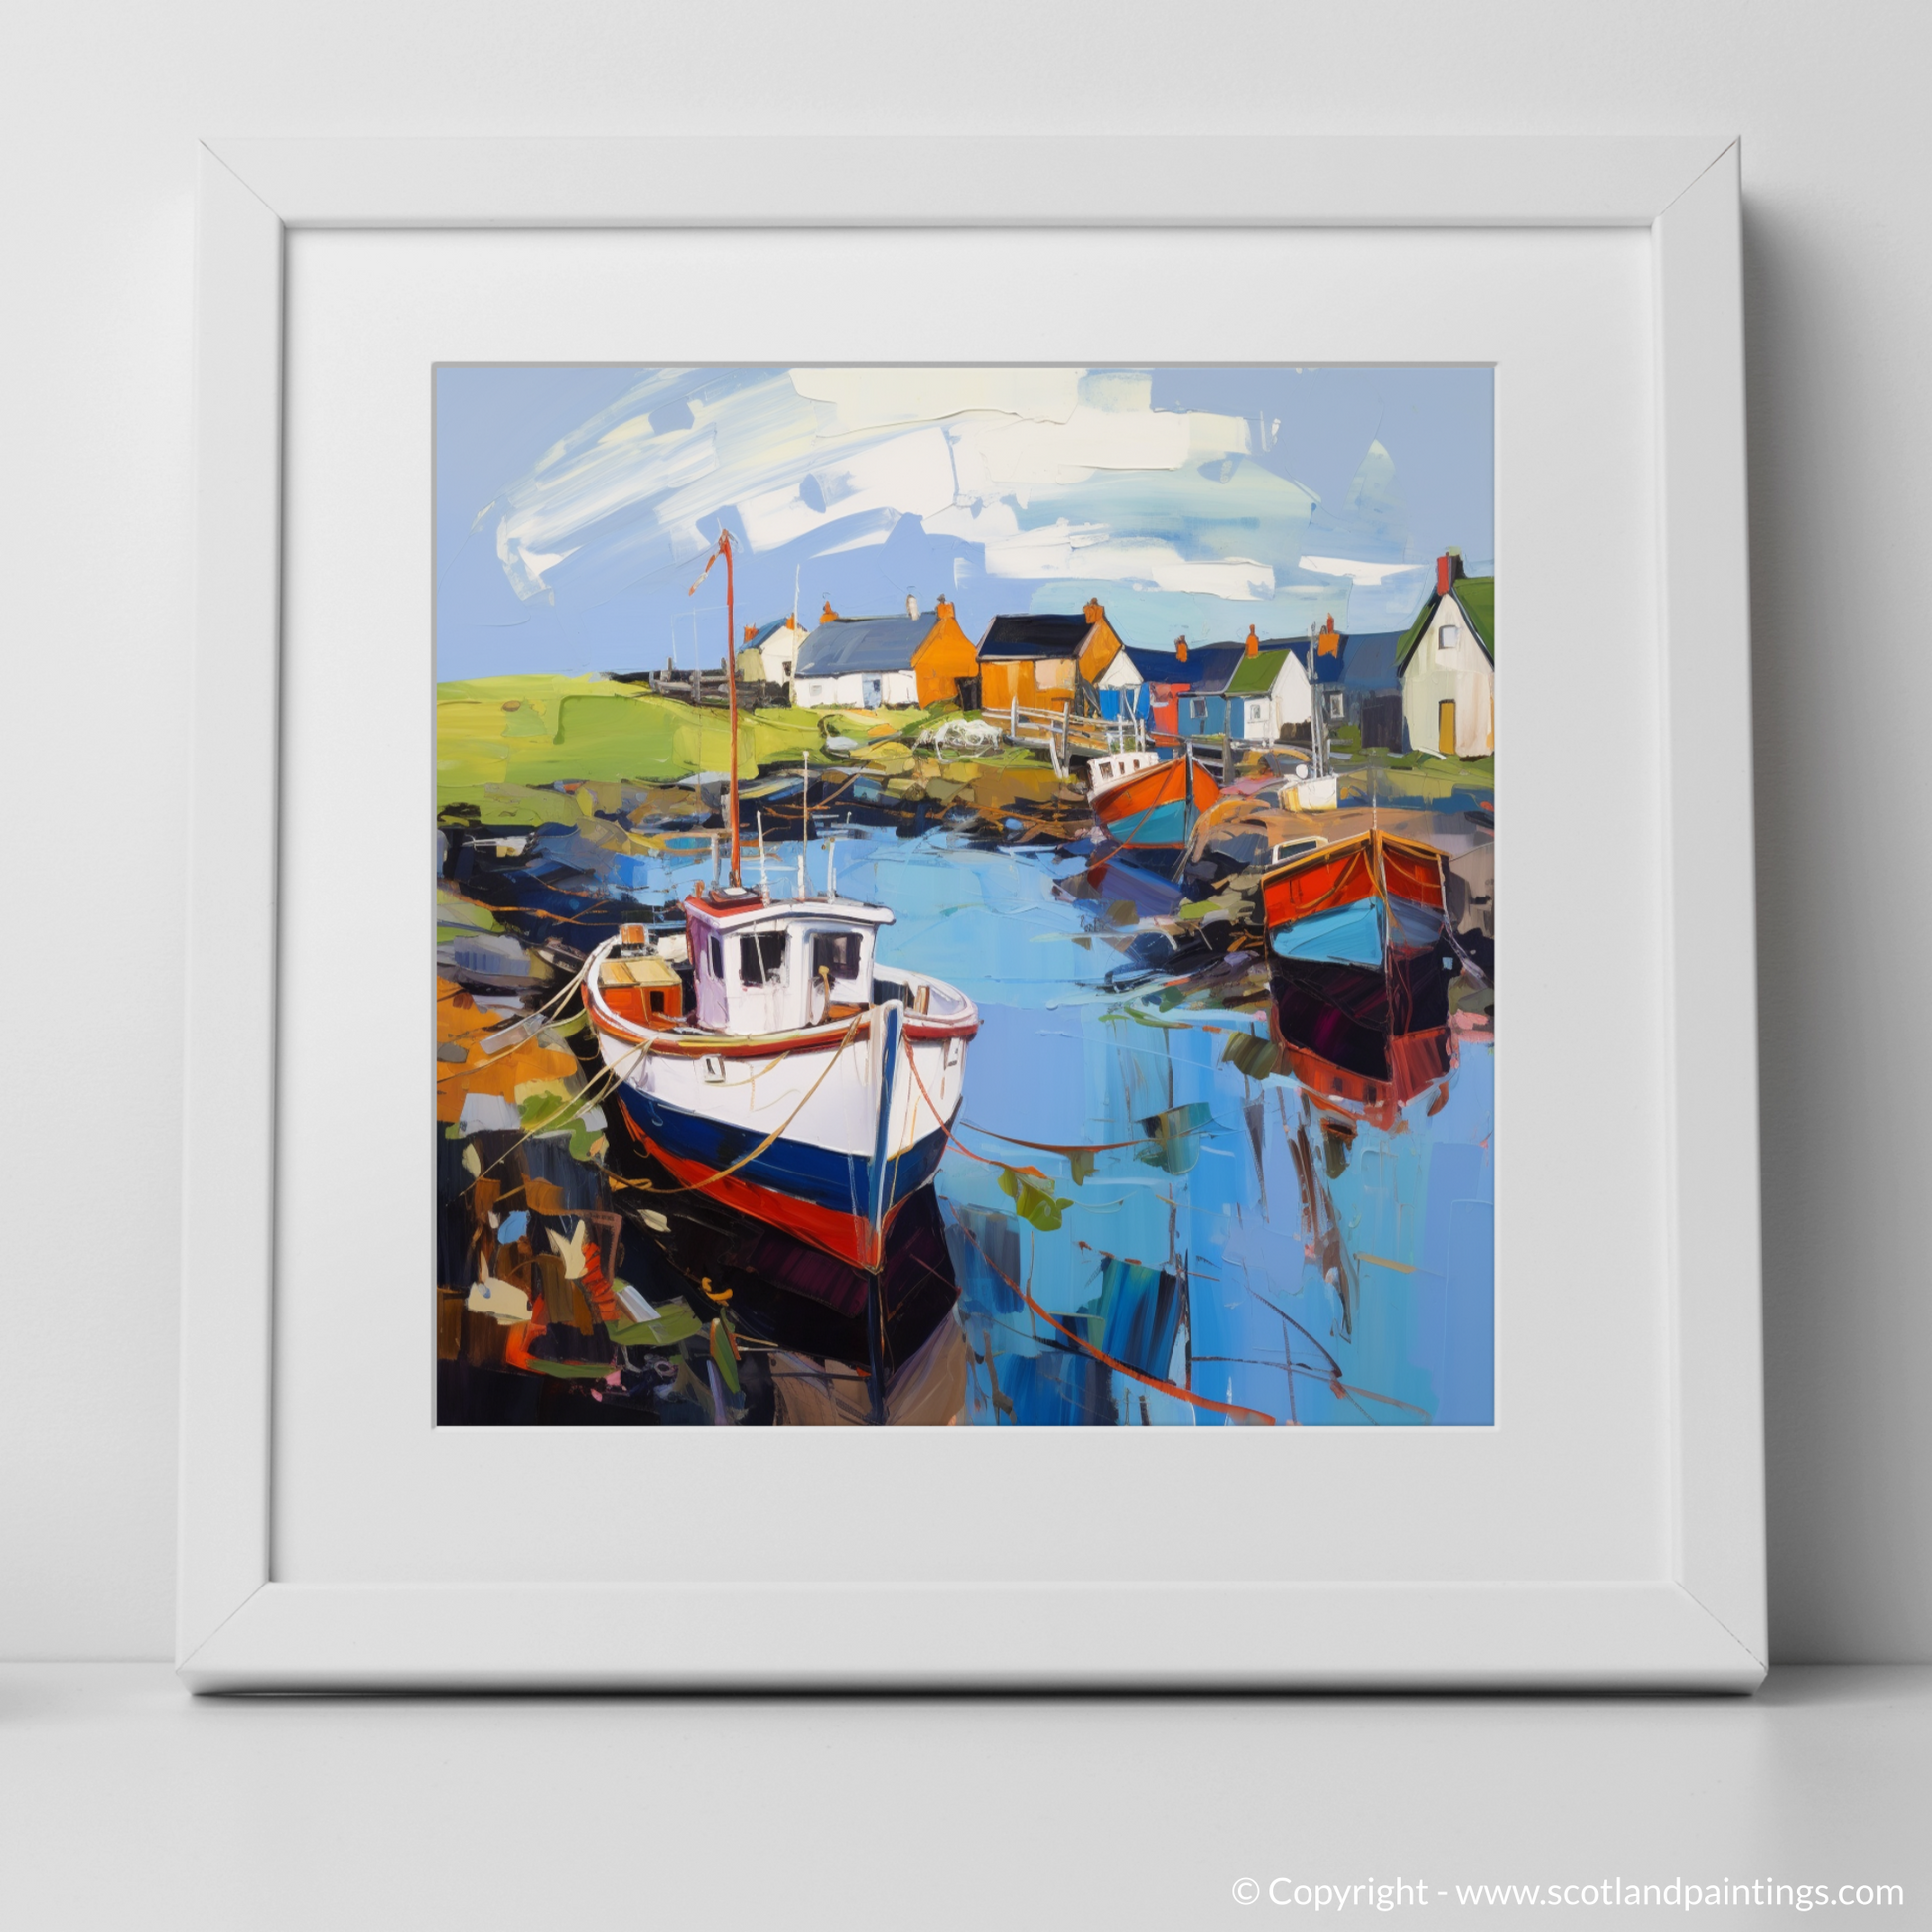 Art Print of Lybster Harbour, Caithness with a white frame